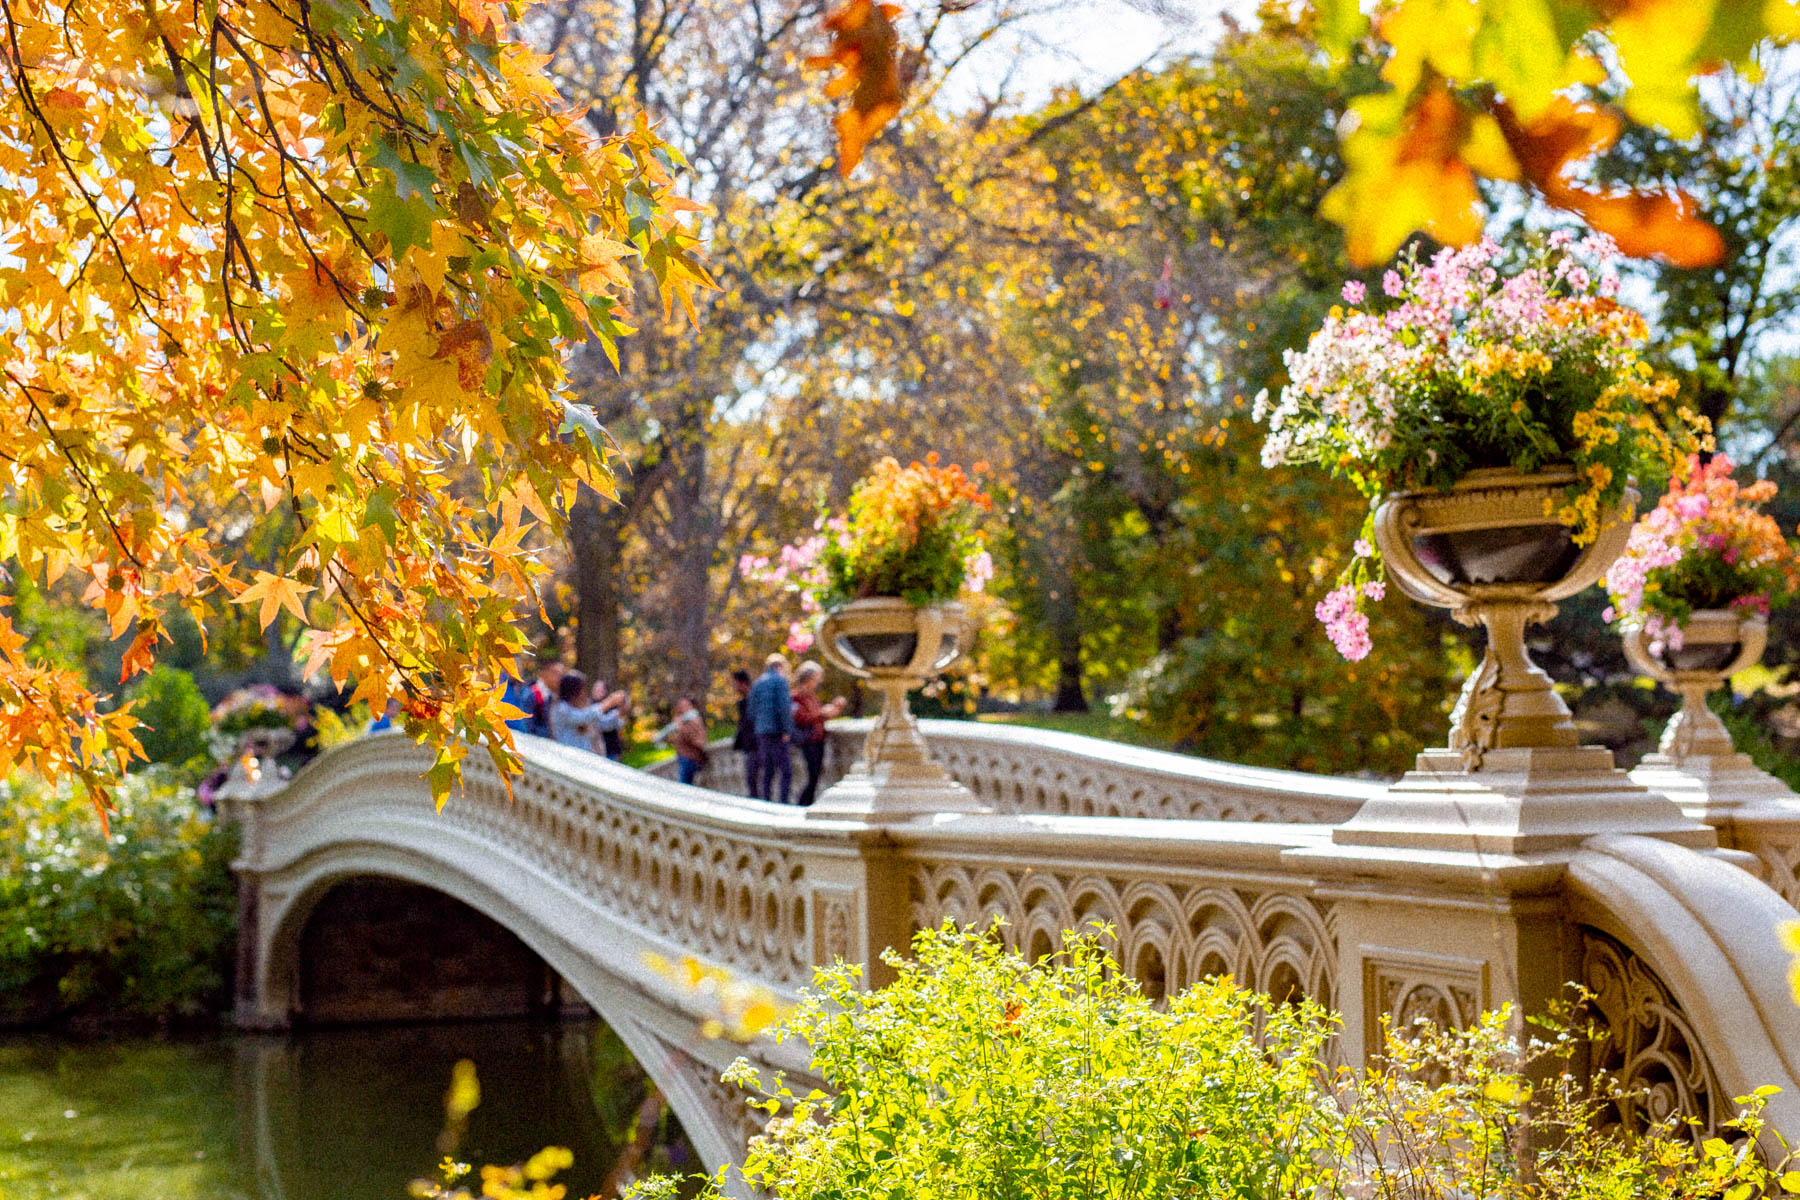 Interesting Central Park Facts, fall foliage nyc
Bow Bridge in Fall 